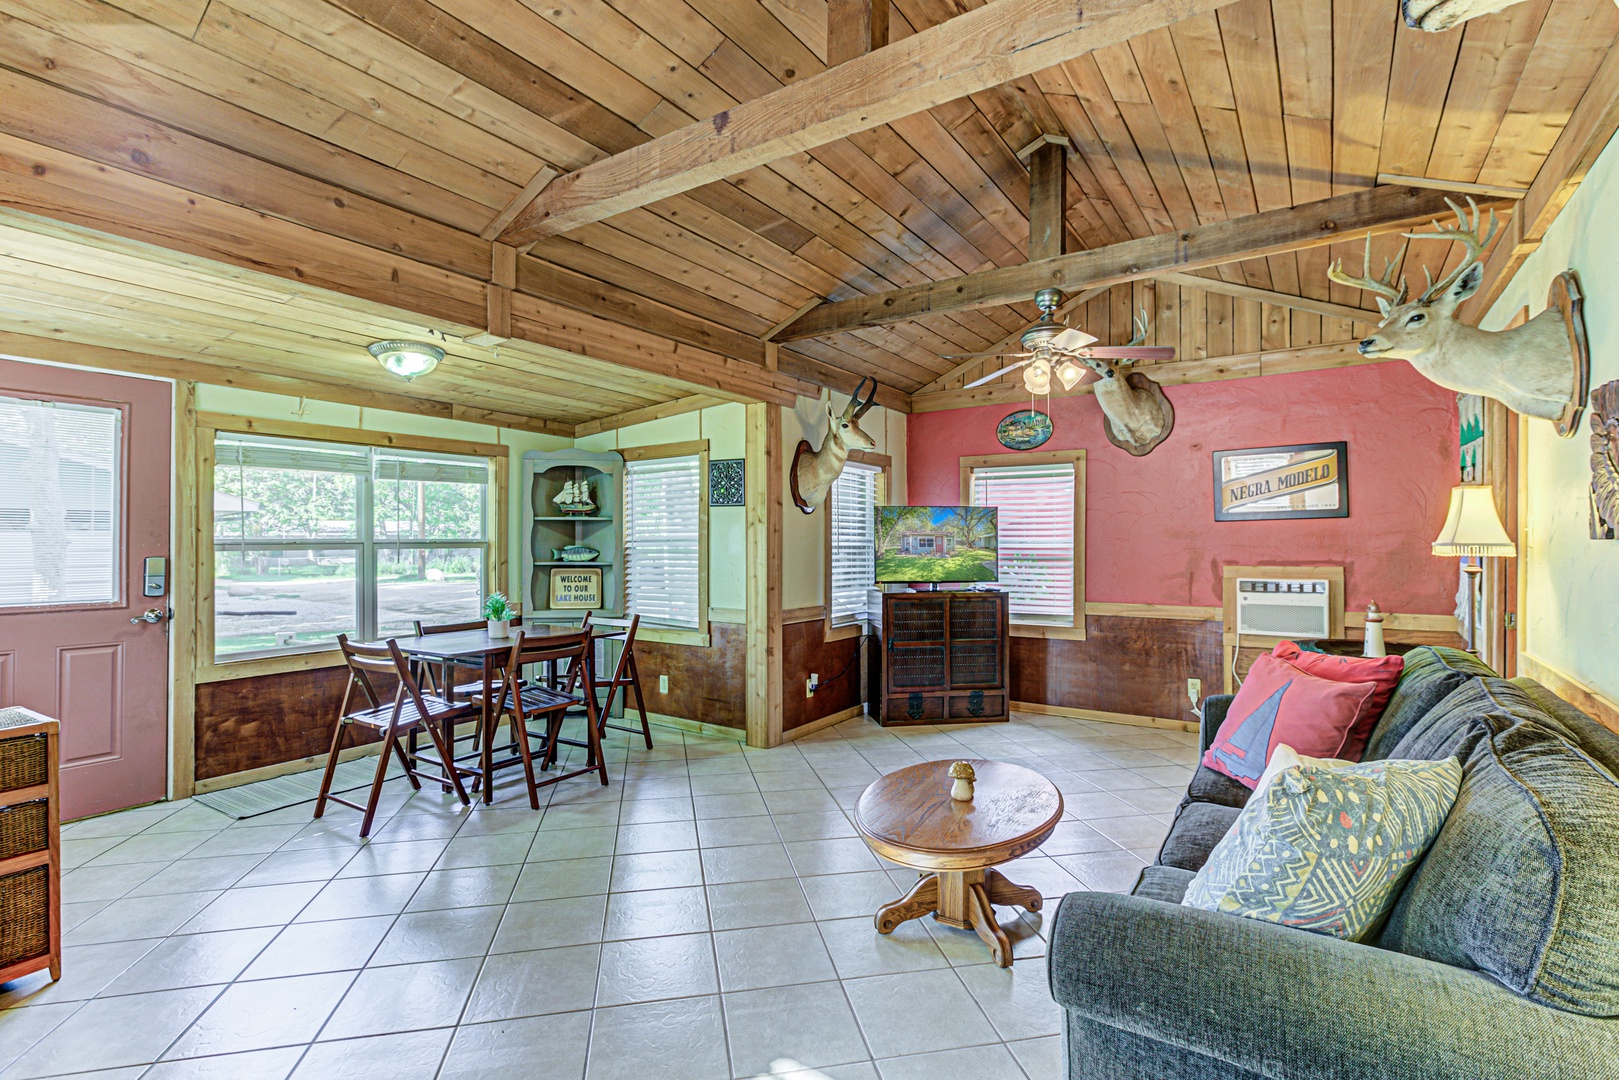 Enjoy the breezy, open layout of the casita’s main living areas